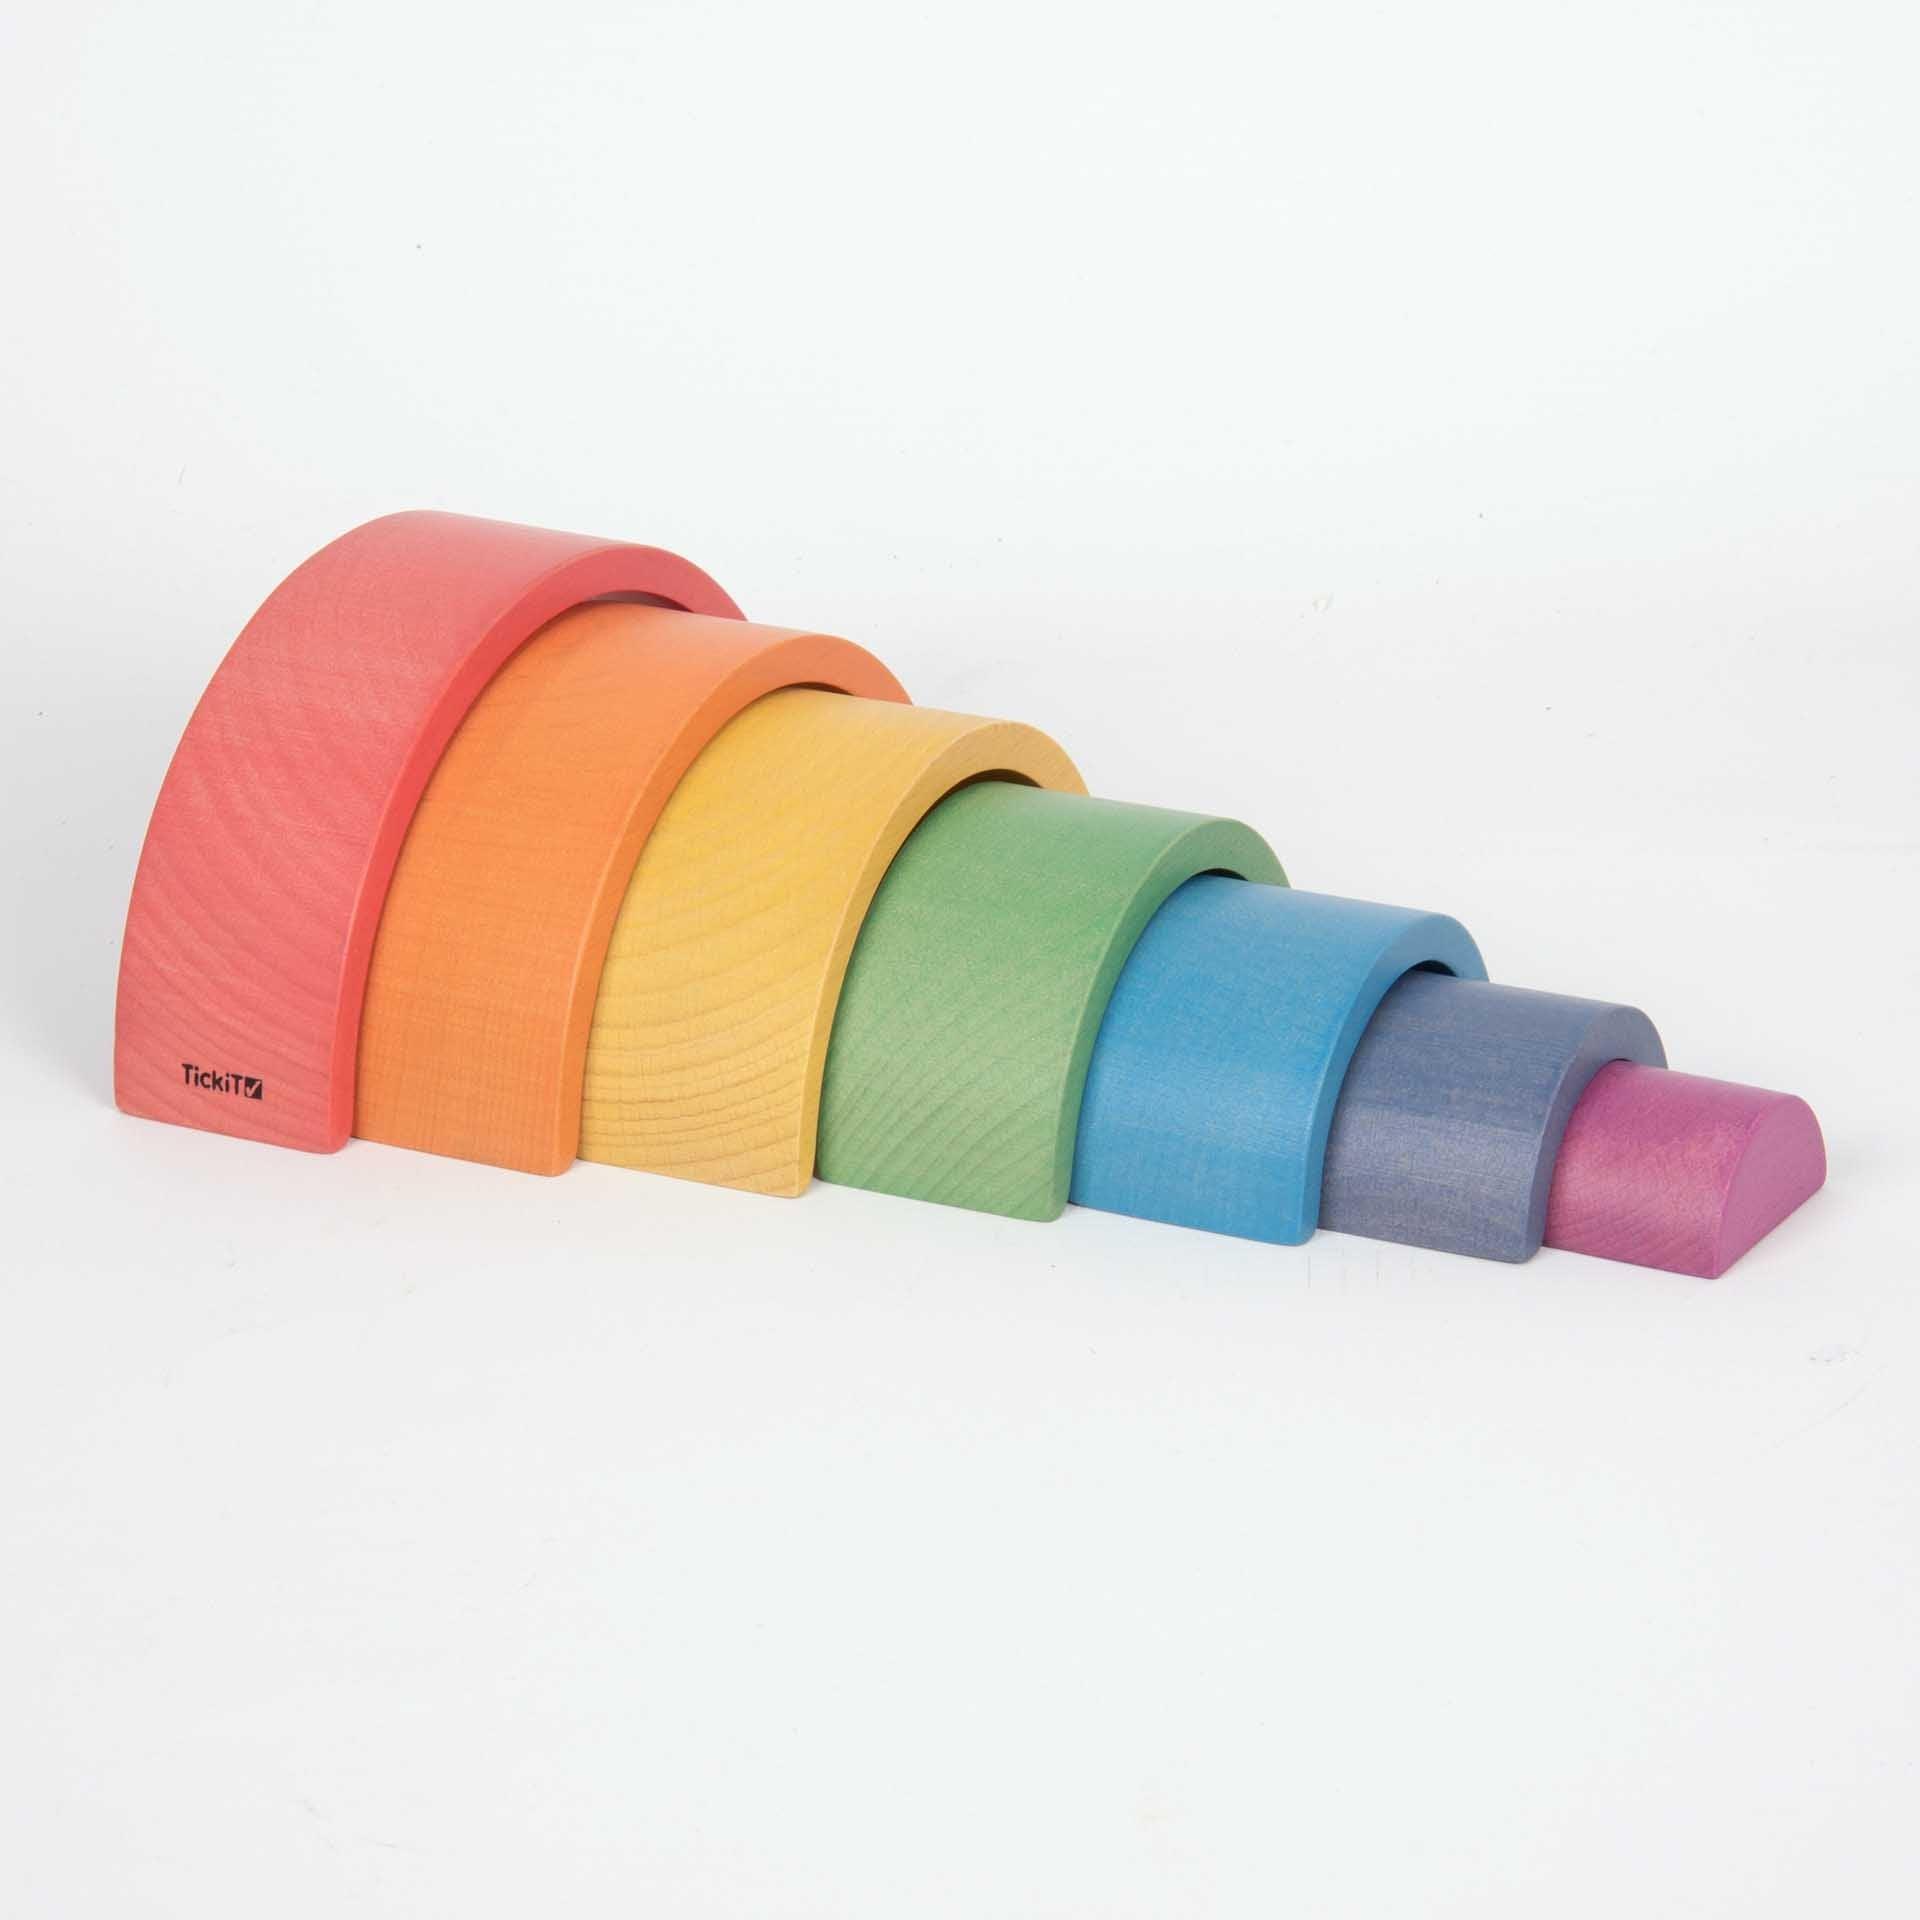 TickIt Rainbow Architect Arches, Our Rainbow Architect Arches are made from beautiful smooth solid beechwood with a natural woodgrain finish in the seven different colours of the rainbow. The TickIt Rainbow Architect Arches nest together as a set with the inner block being a solid 3D semicircle. This shape set will allow your child to unlock their creativity and innovation.Learning through play, the nesting set can be used to compliment the design and construct of towers, sculptures or create homes for smal